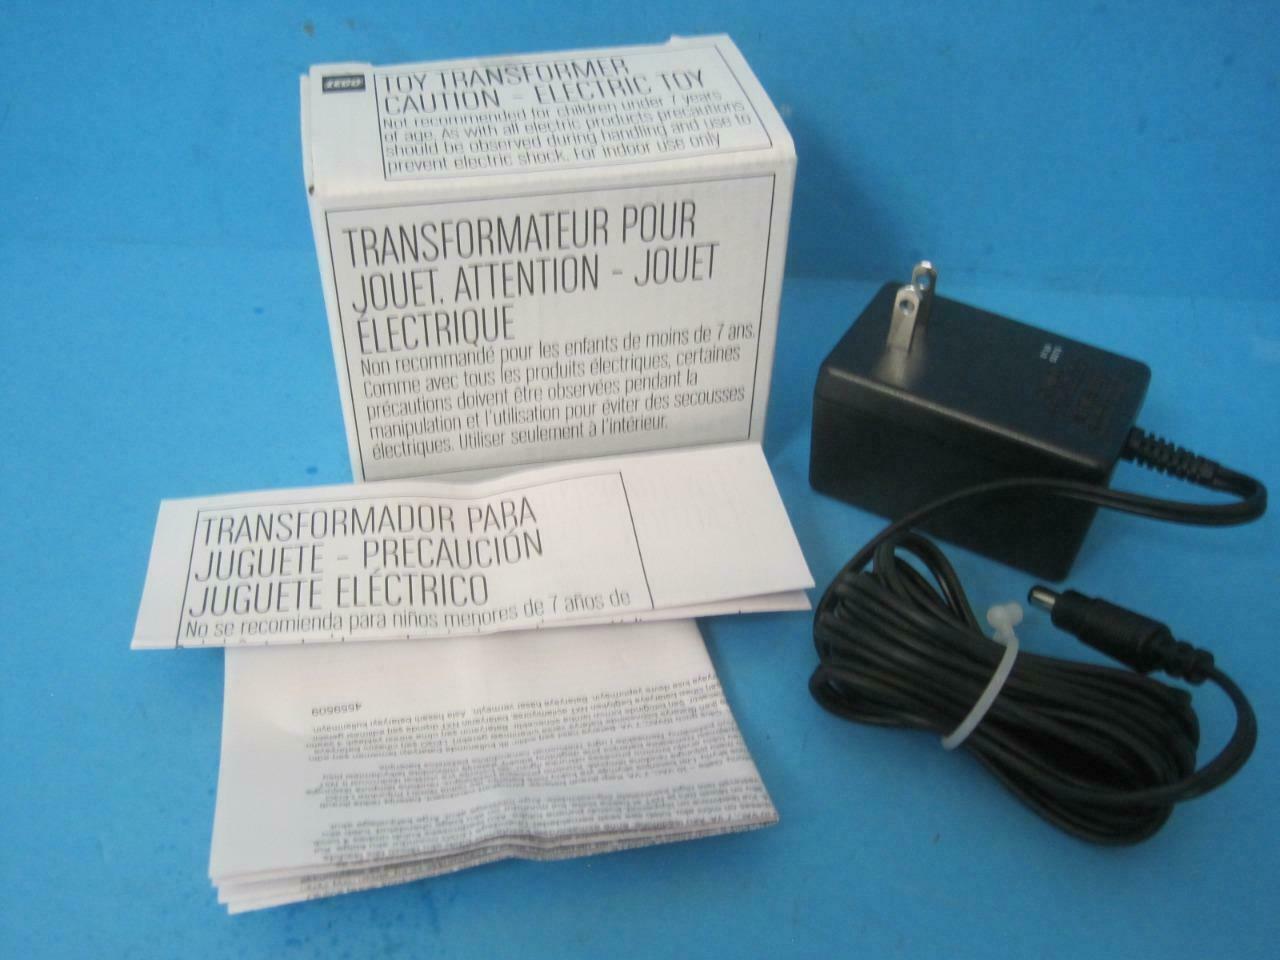 LEGO TOY TRANSFORMER POWER SUPPLY CORD CABLE AC ADAPTER 86716 PI-41-824US 10V